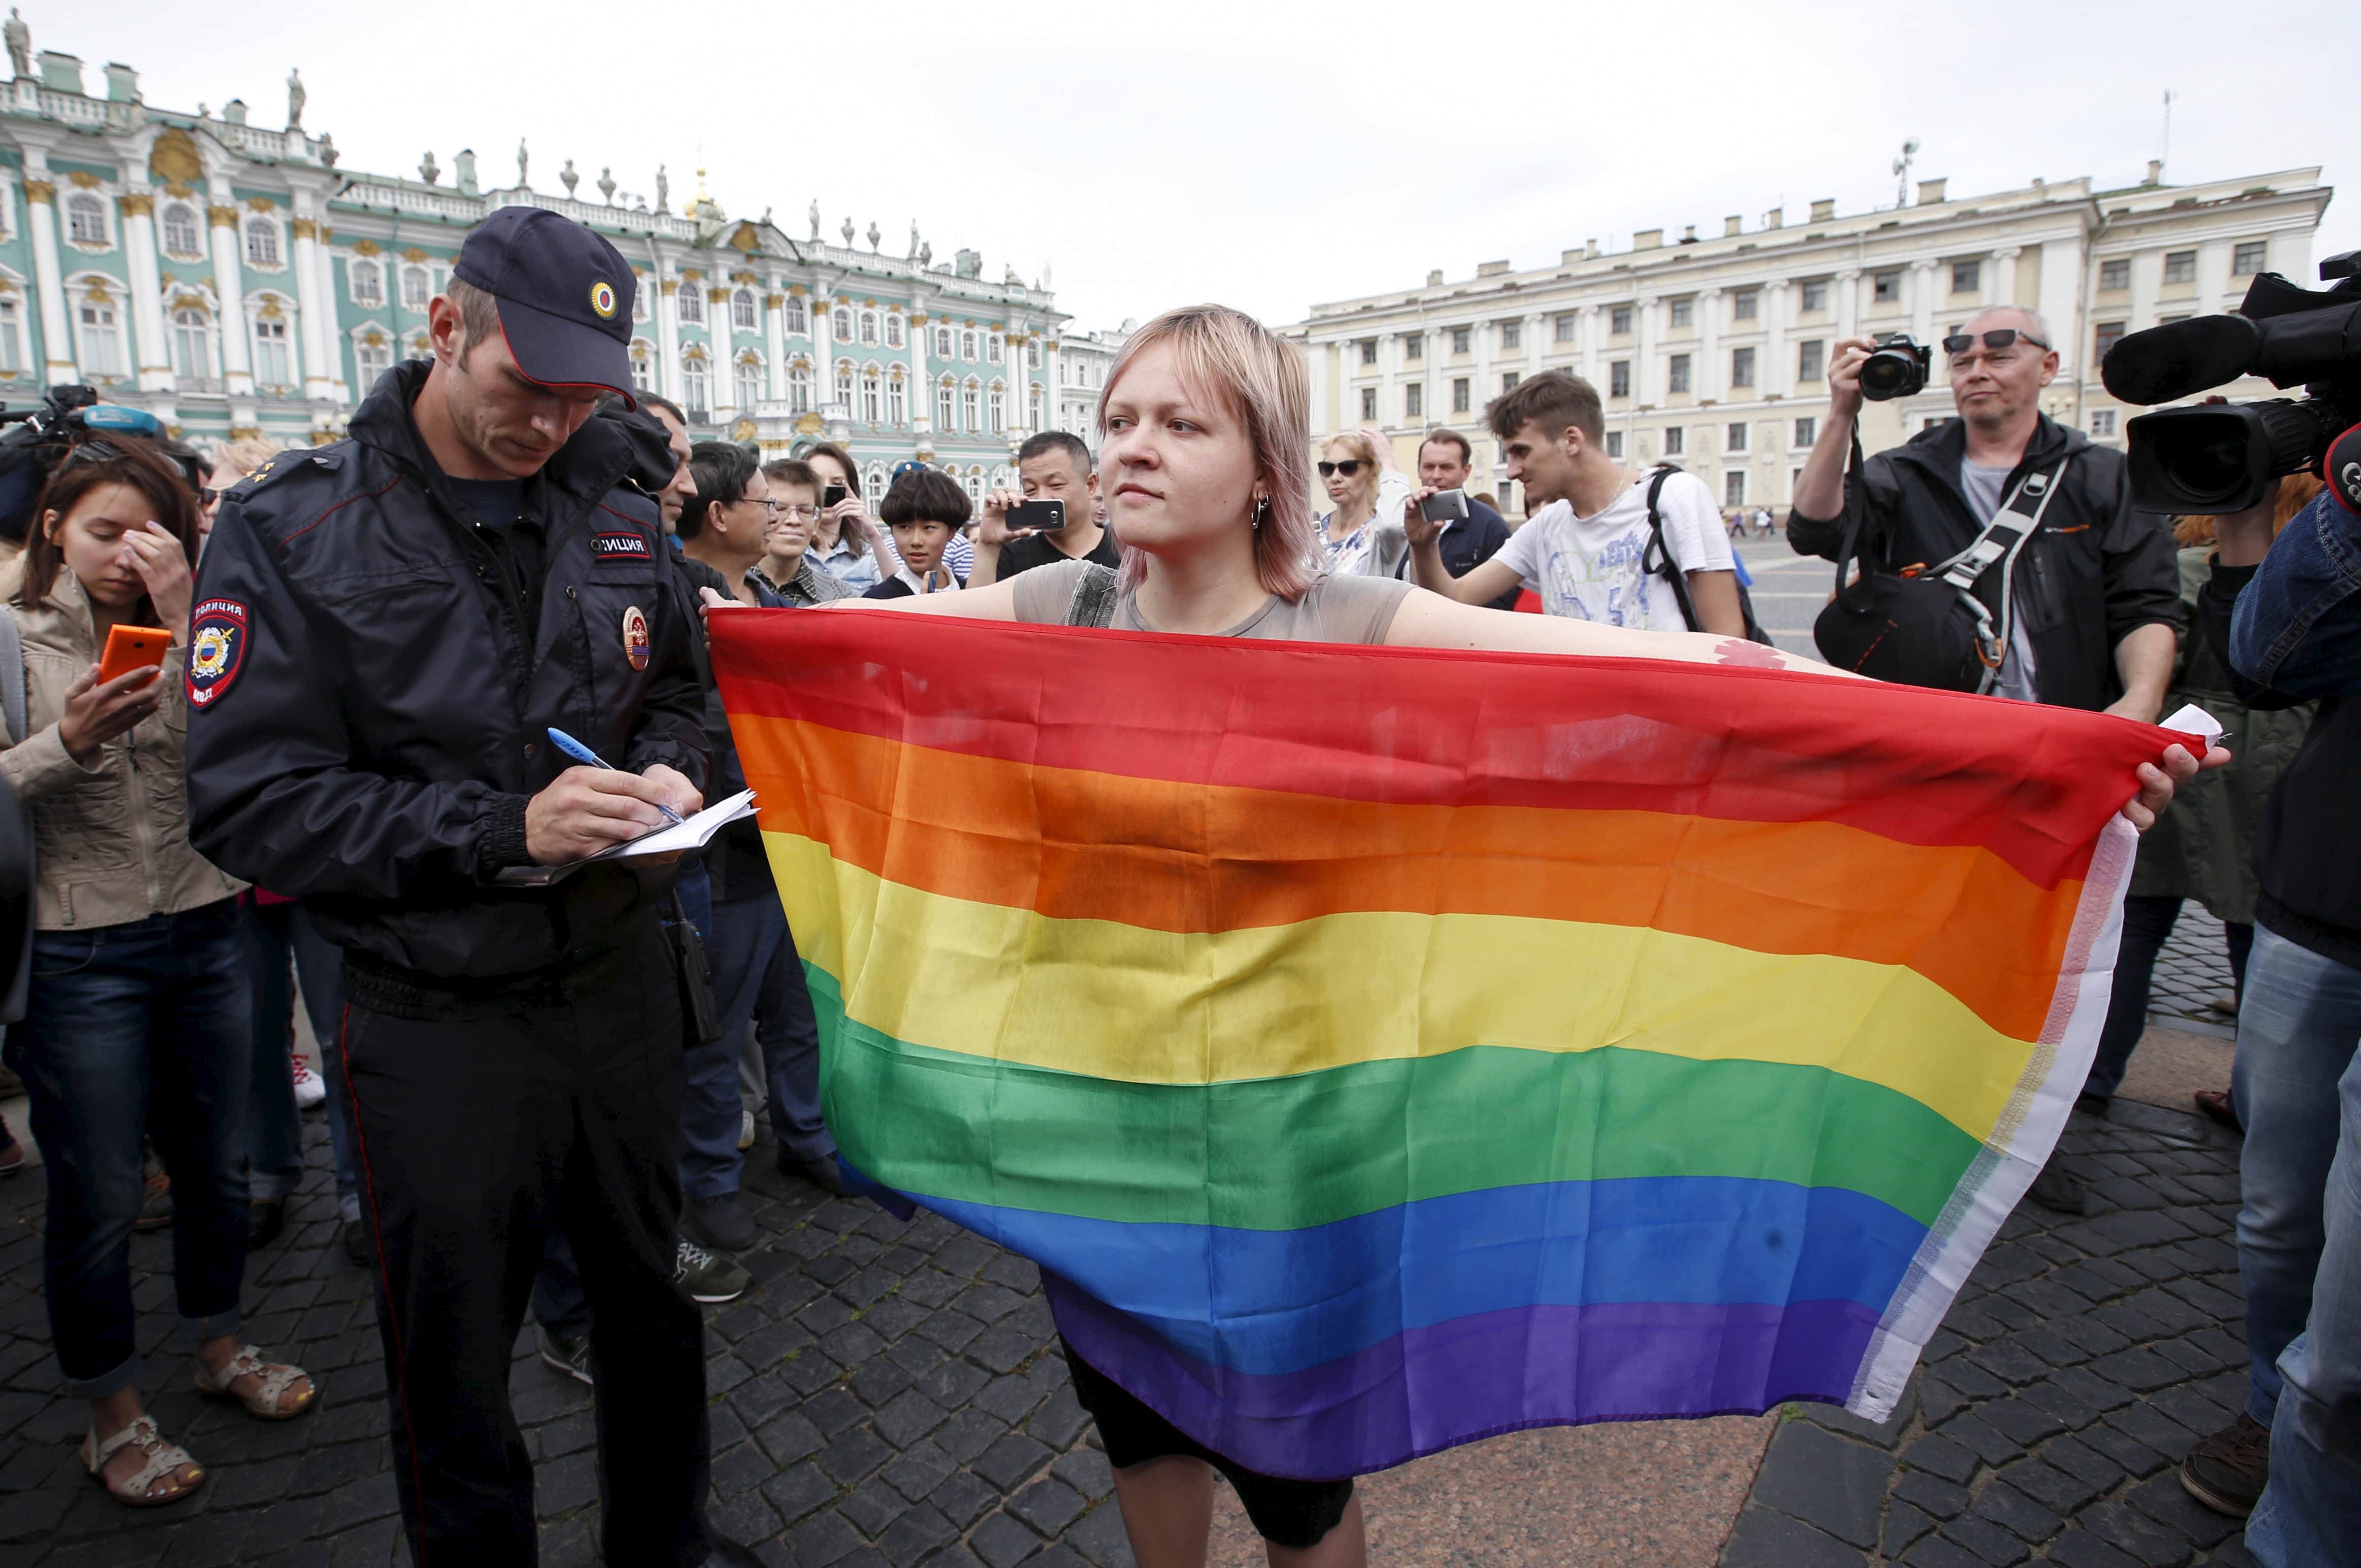 An activist poses with a rainbow flag in front of the media during a protest in Dvortsovaya Square in St. Petersburg, 2 August 2015, REUTERS/Maxim Zmeyev